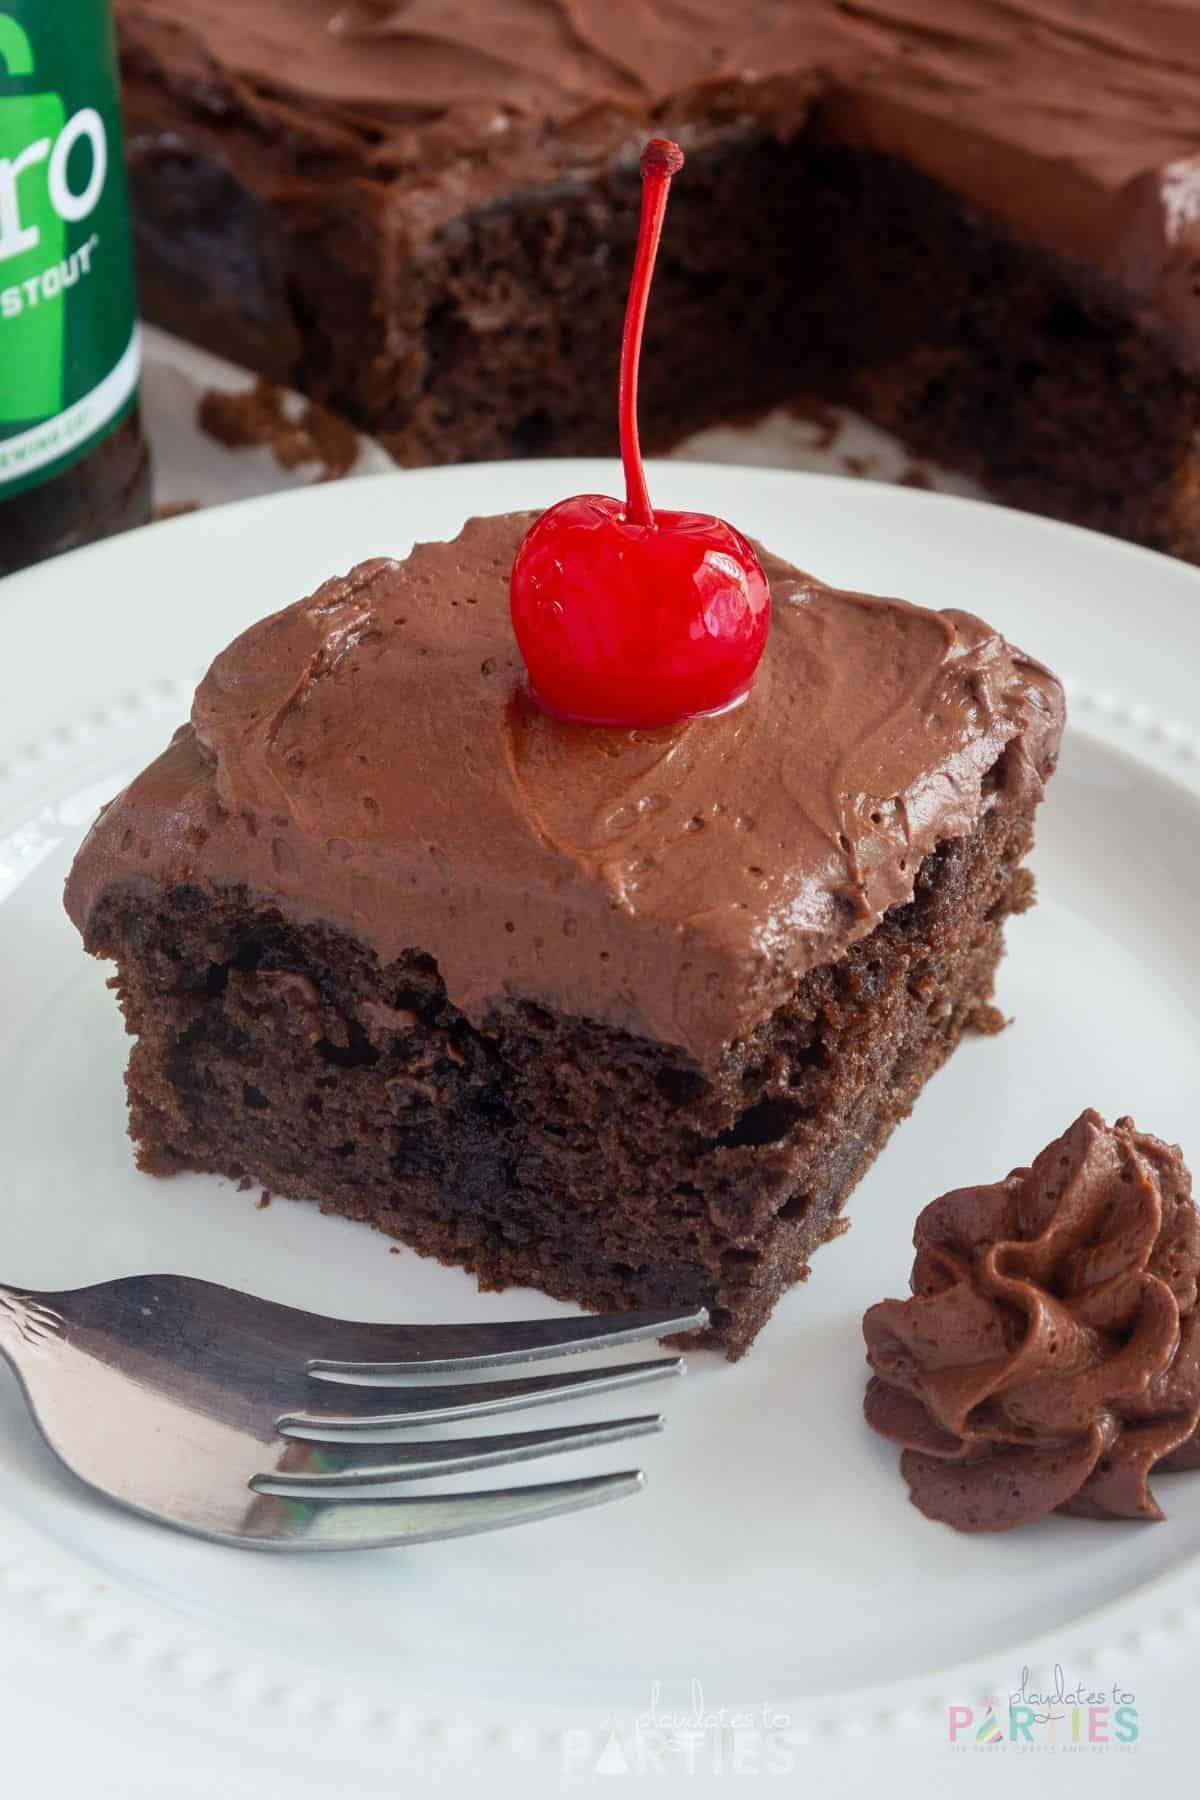 Chocolate beer cake on a white plate with a cherry on top.